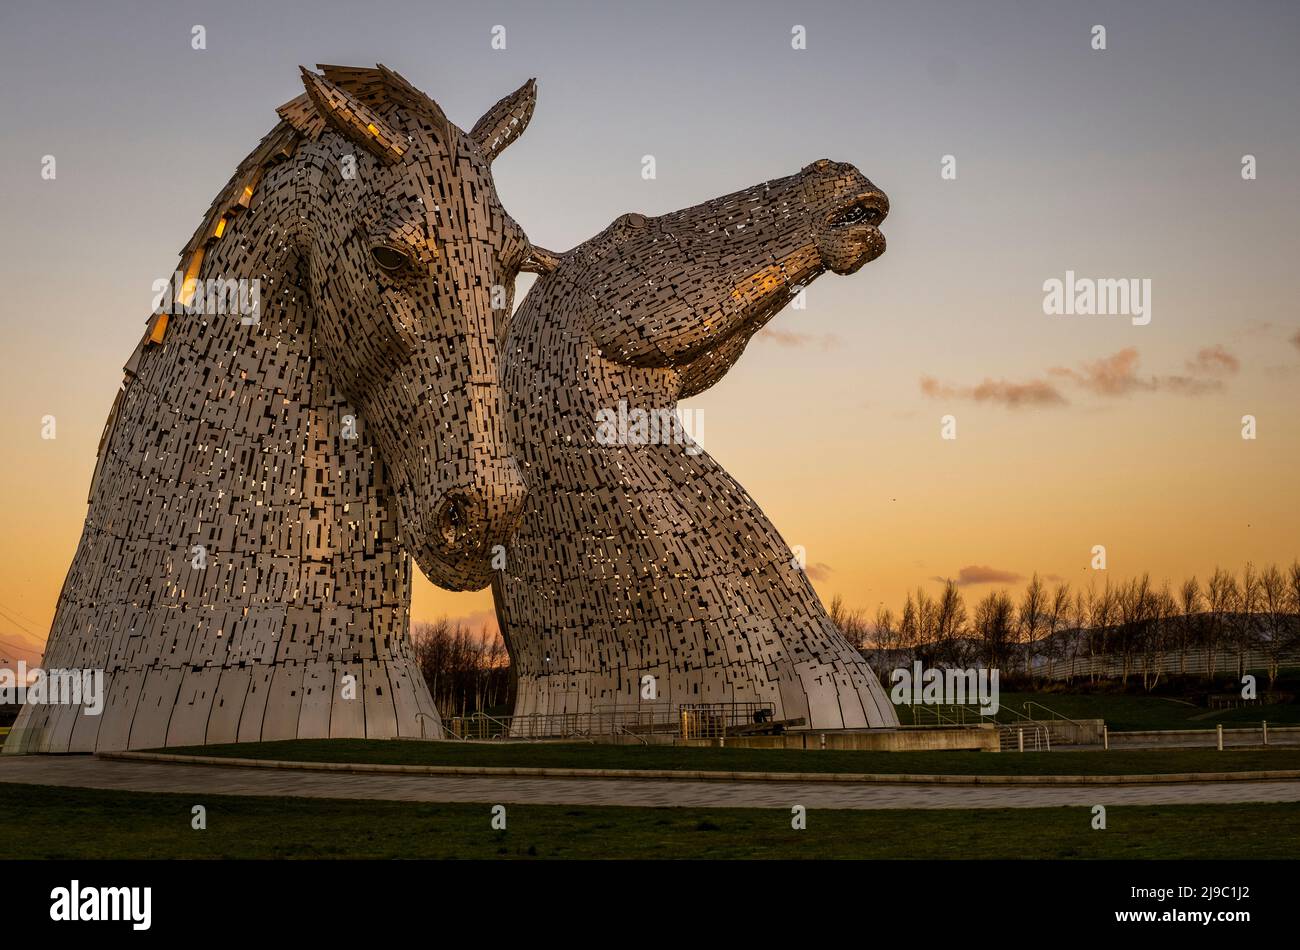 The beautiful sculptures of the Kelpies in Falkirk during sunrise. Stock Photo